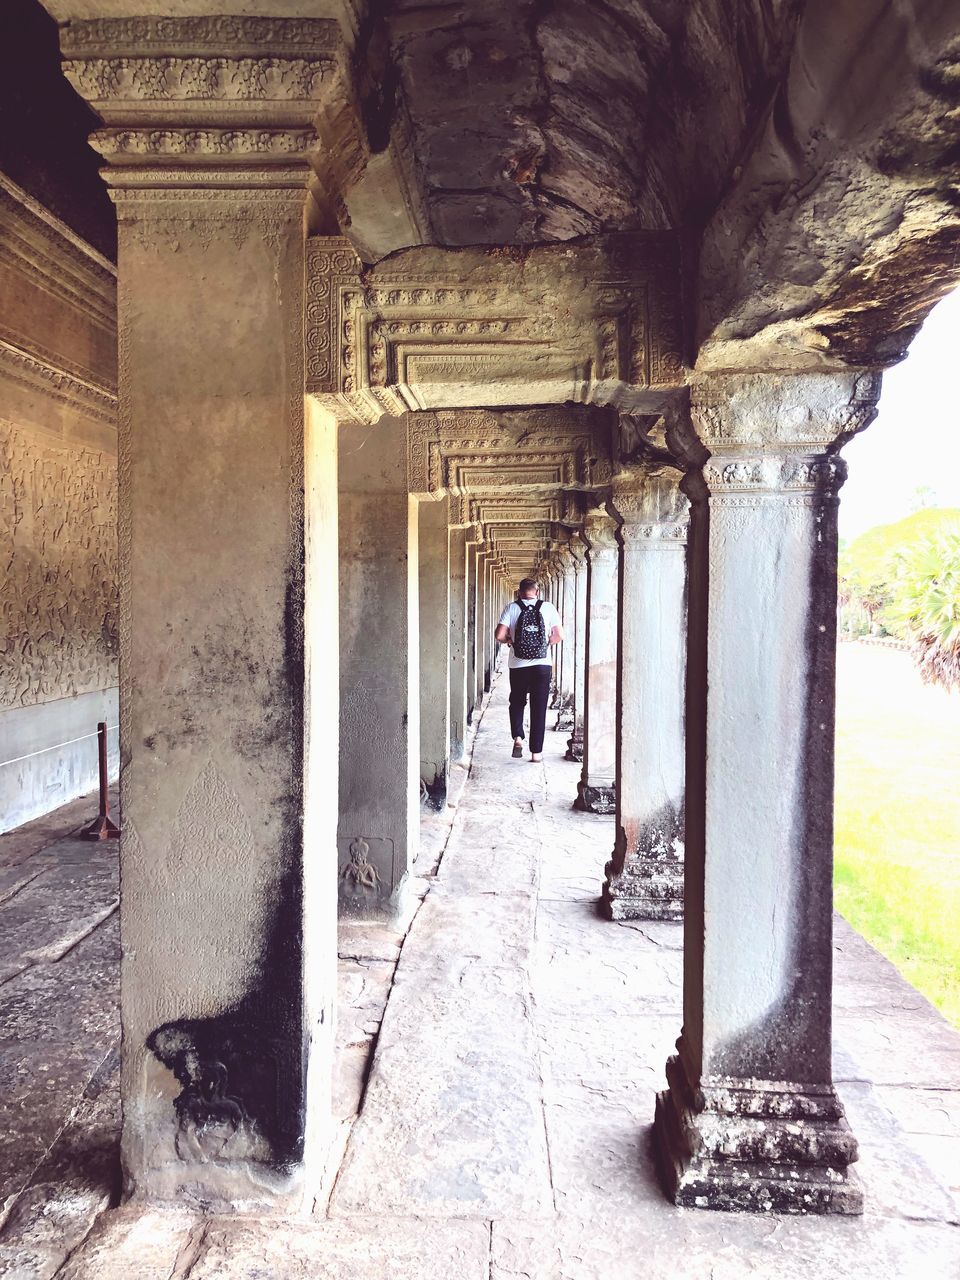 REAR VIEW OF MAN WALKING ON COLONNADE